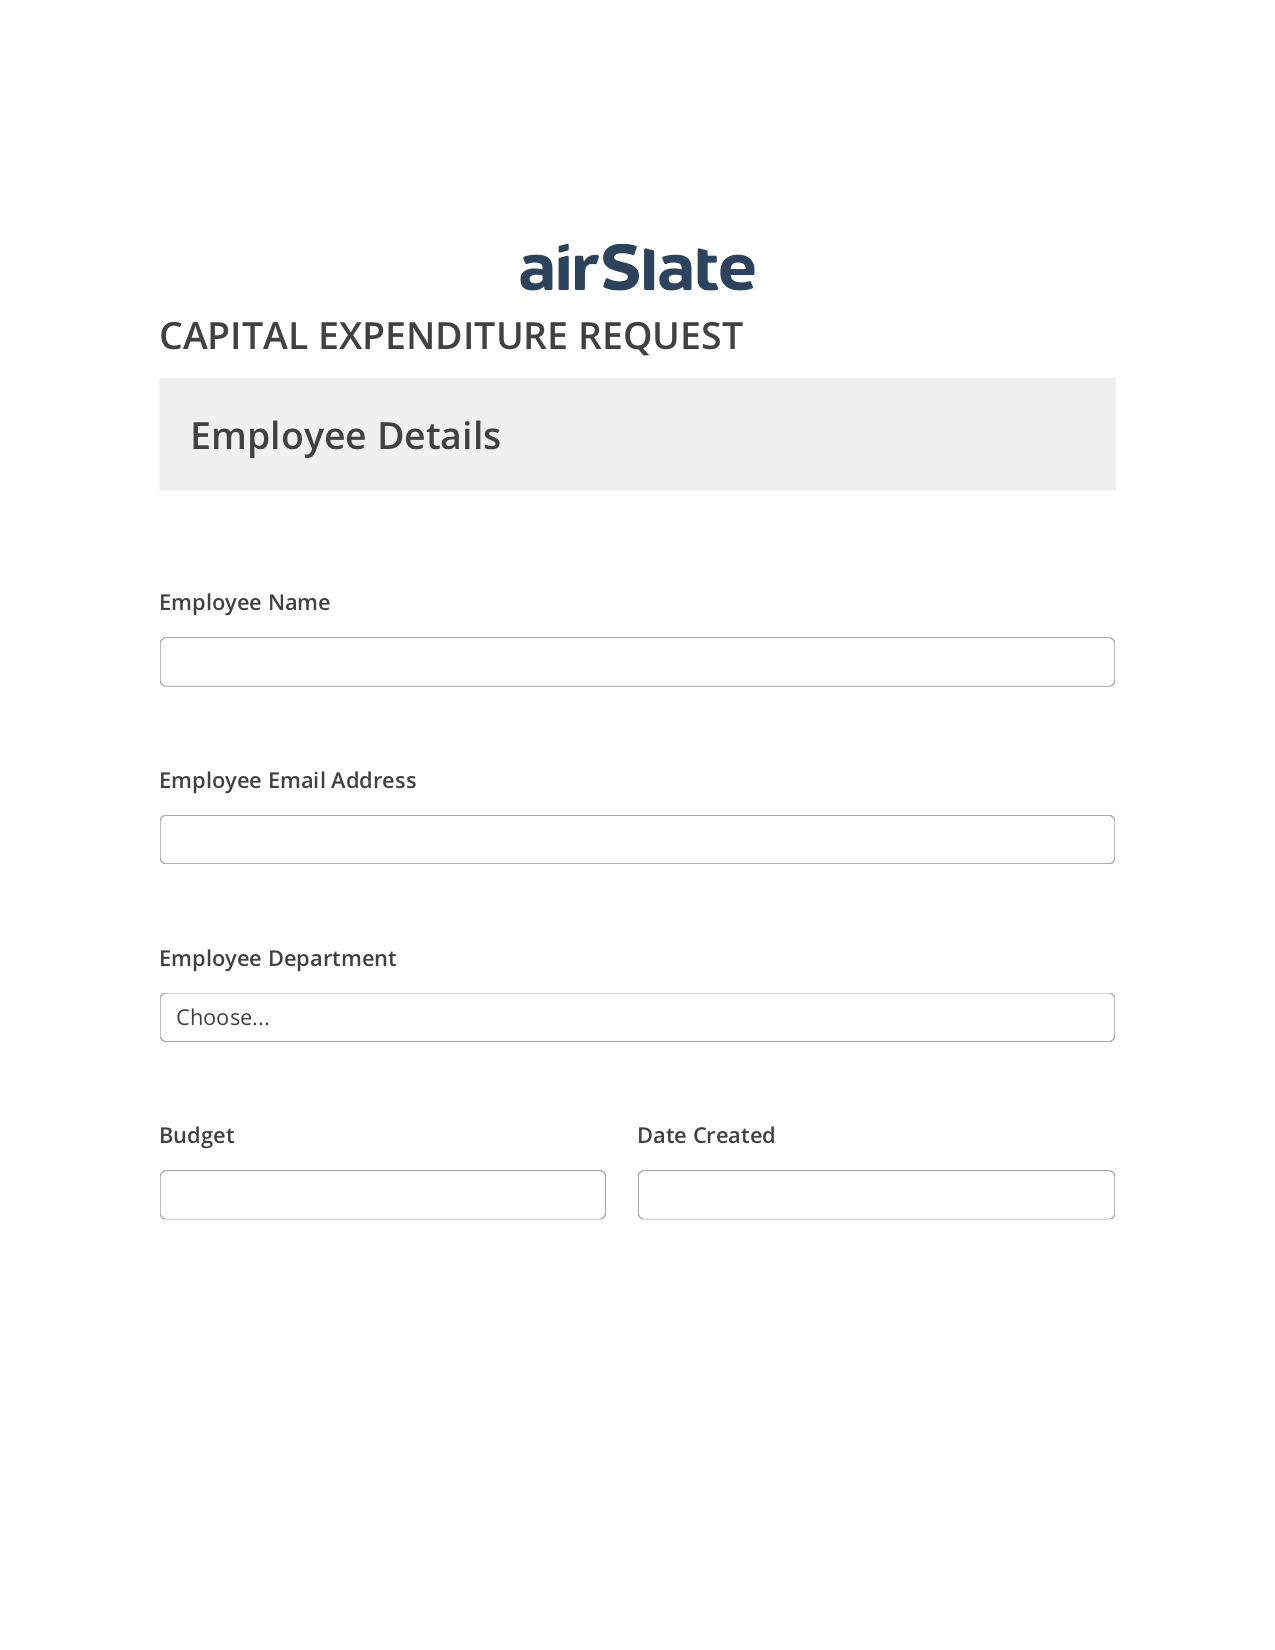 Capital Expenditure Request Approval Workflow Pre-fill from MySQL Bot, Lock the Slate Bot, Archive to Dropbox